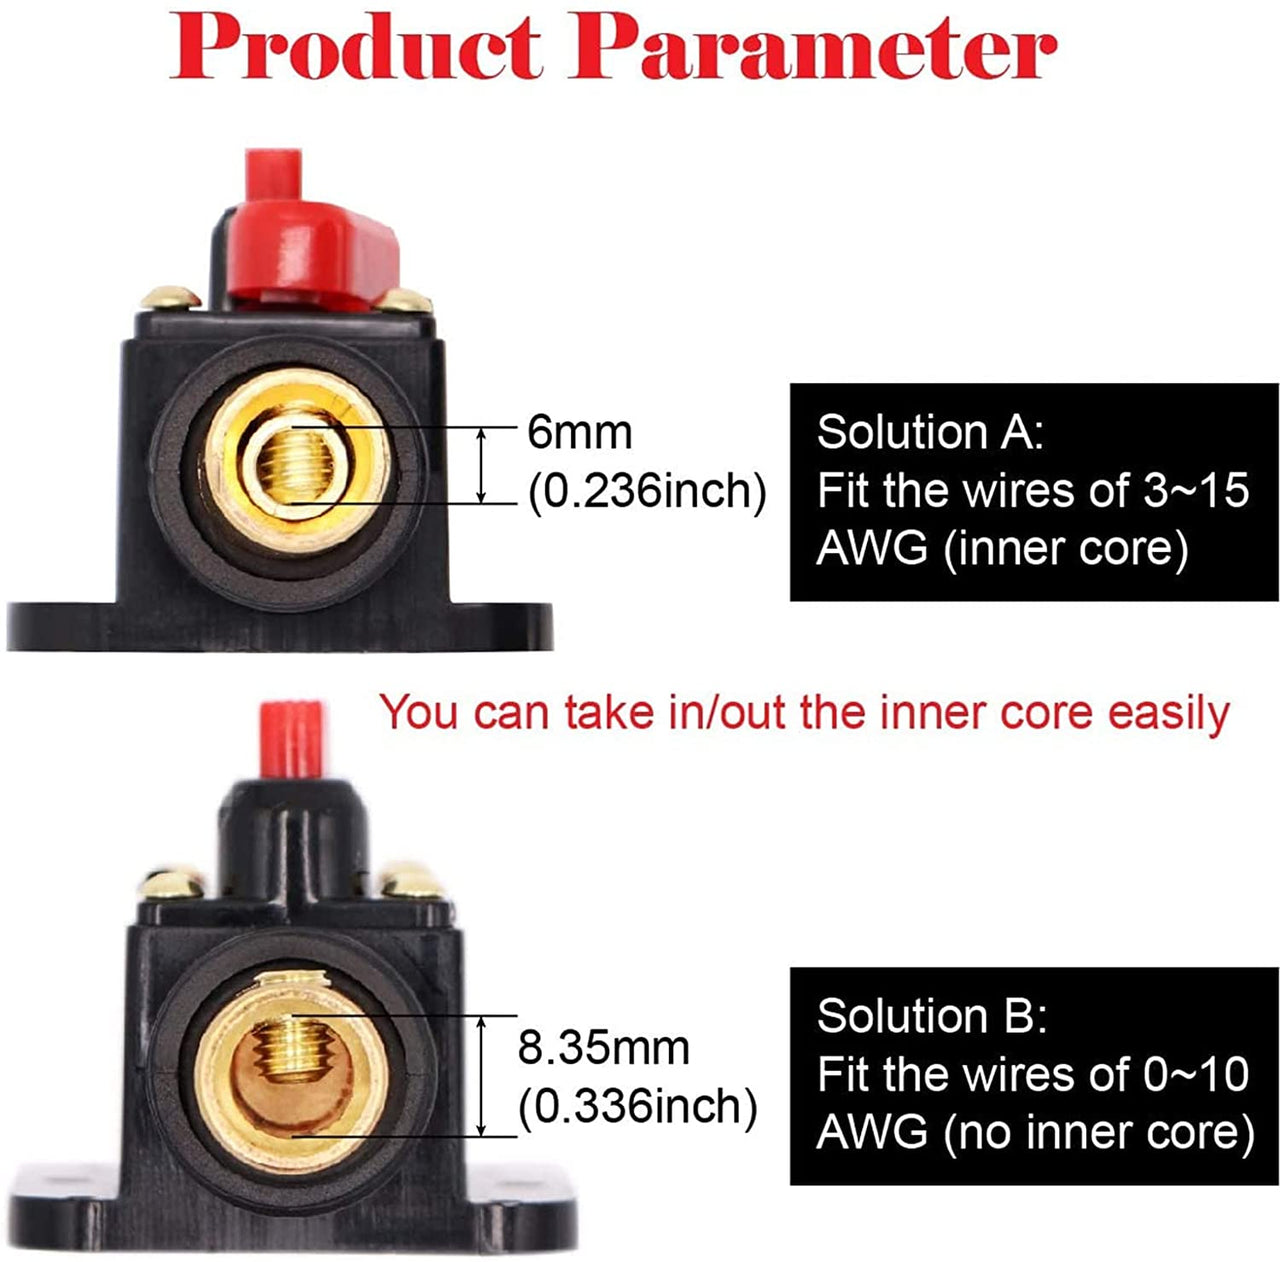 Absolute ICB30 4/8 AWG 30 Amp in-line Circuit Breaker with Manual Reset with Manual Reset Car Auto Marine Boat Stereo